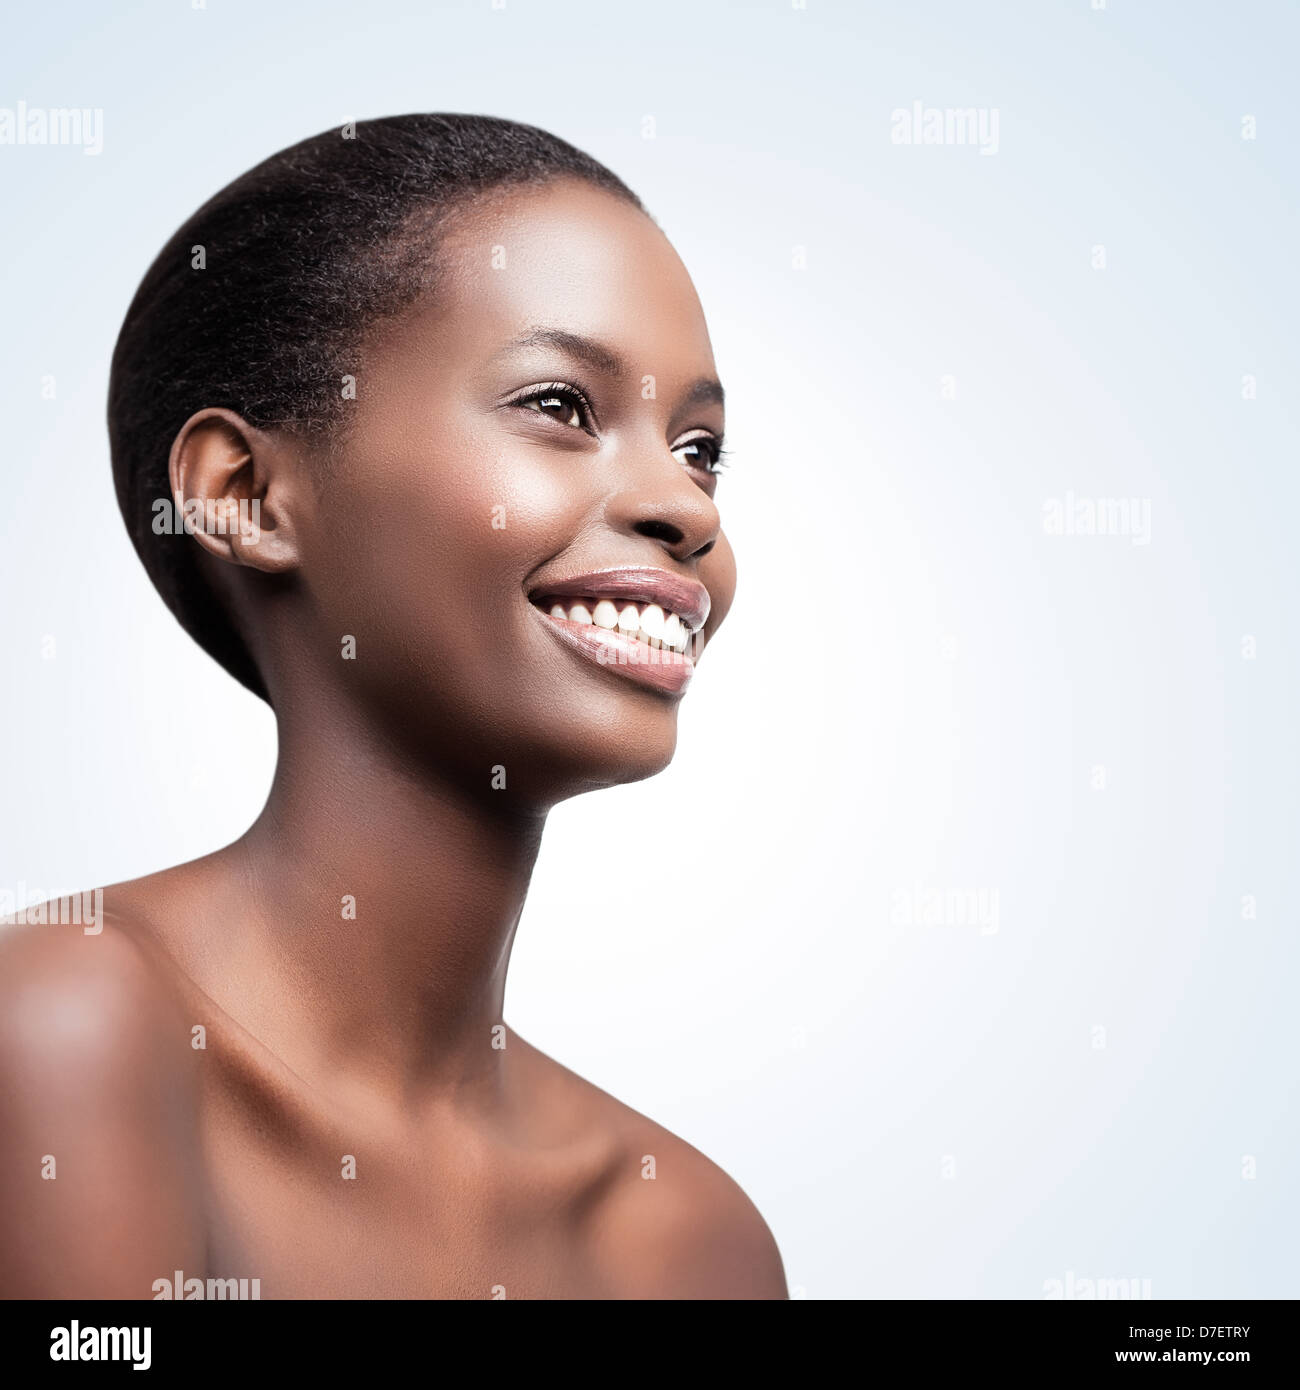 Portrait of a beautiful African woman posing in front of a blue background. Stock Photo